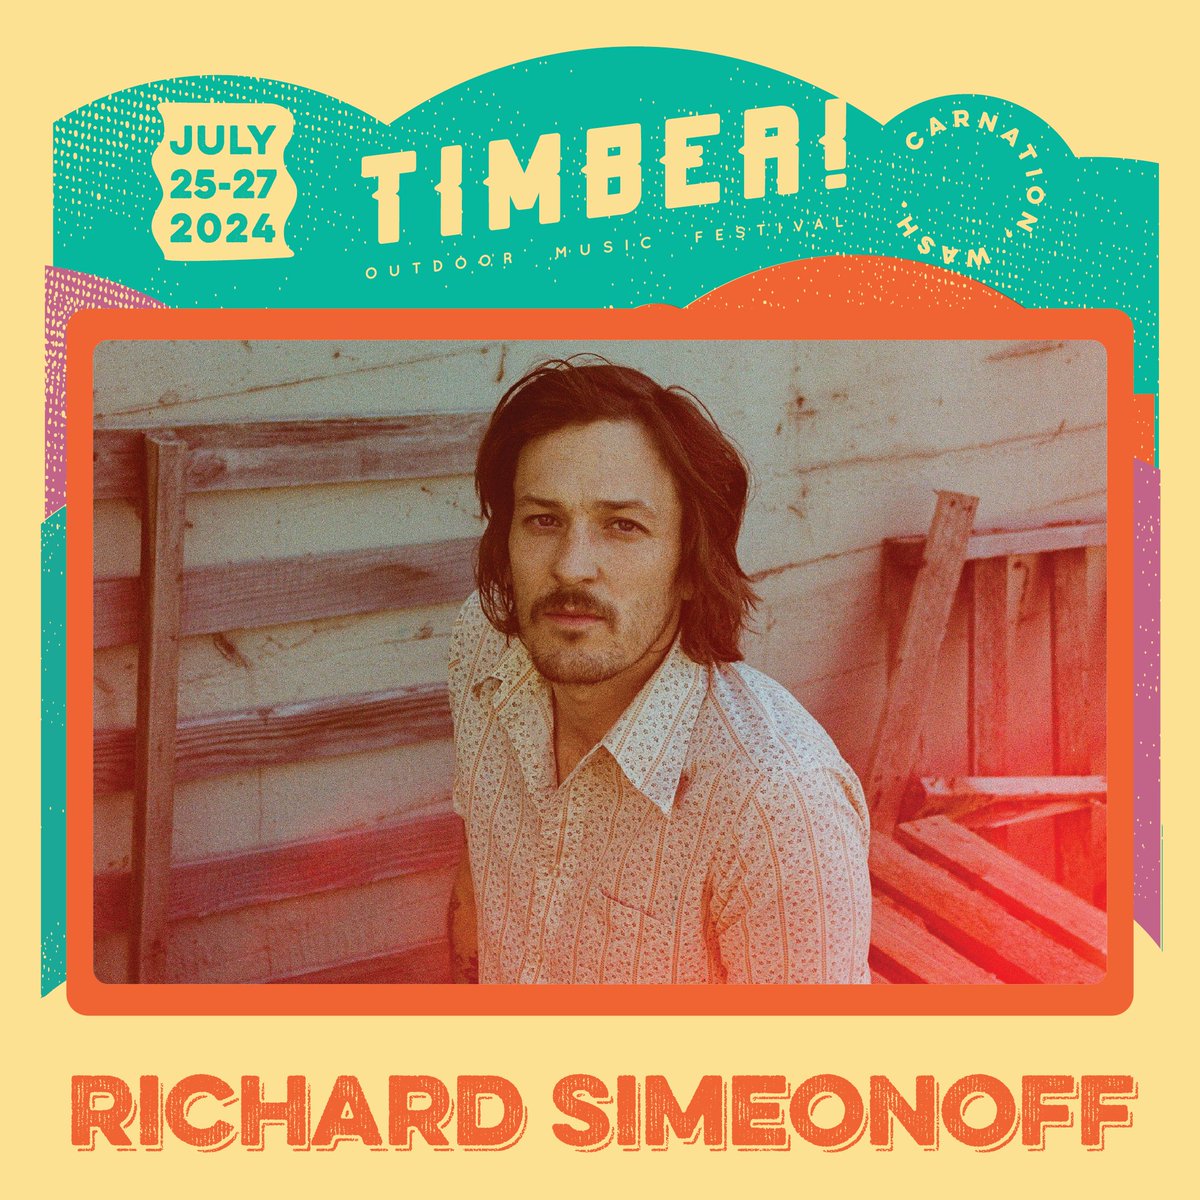 Richard Simeonoff shares his raw, earthy melodies with us on Friday, July 26. Get your weekend passes before June 1 and save $30: timbermusicfest.com #timberfest